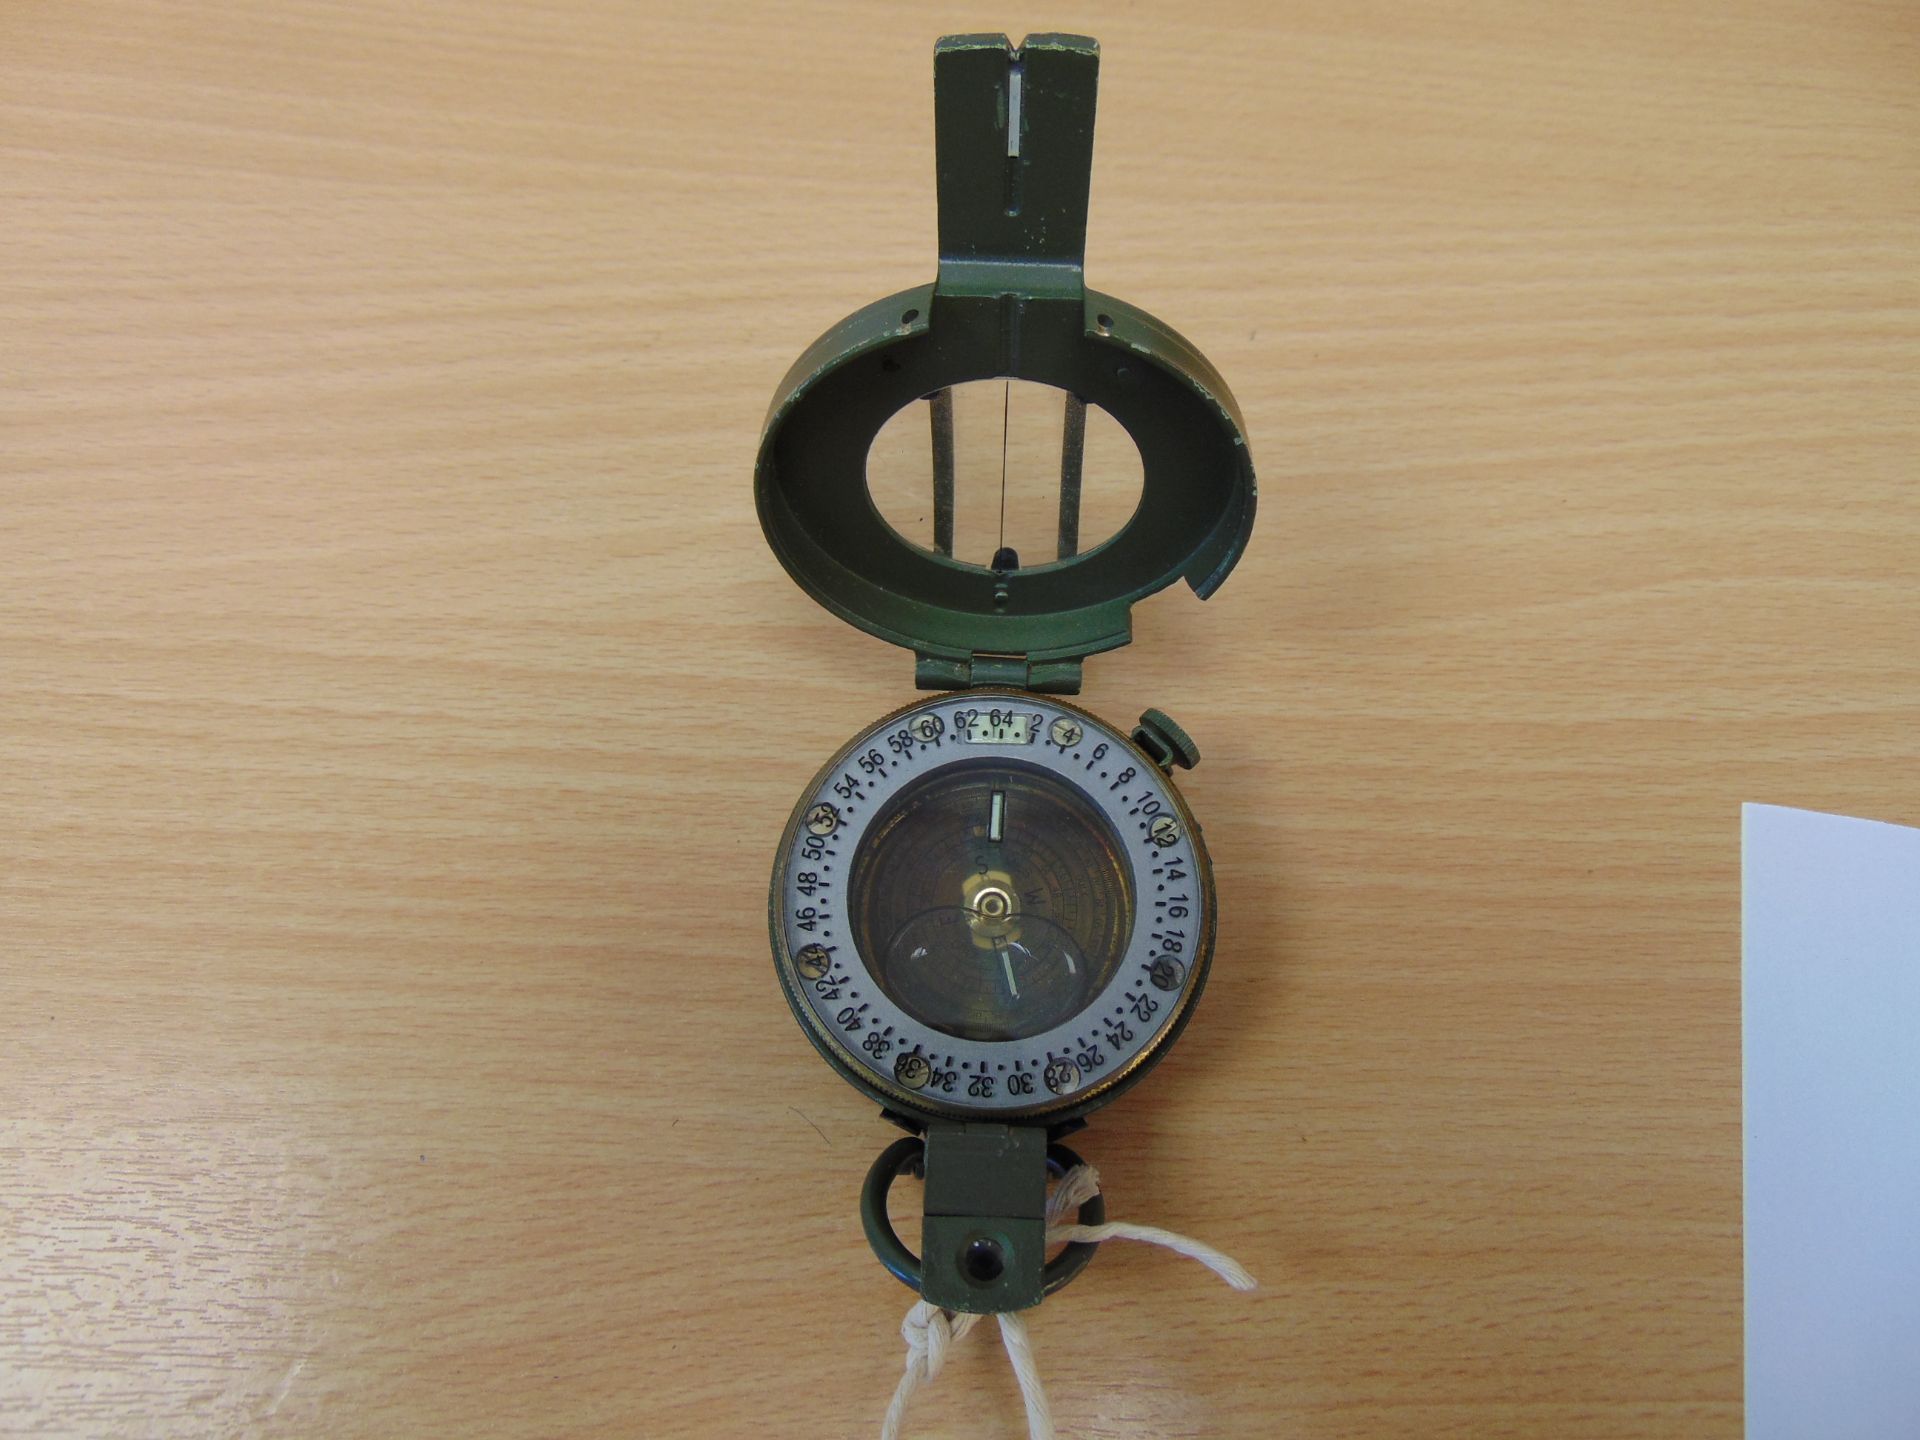 Stanley London British Army Prismatic compass in mils Nato marks - Image 4 of 4